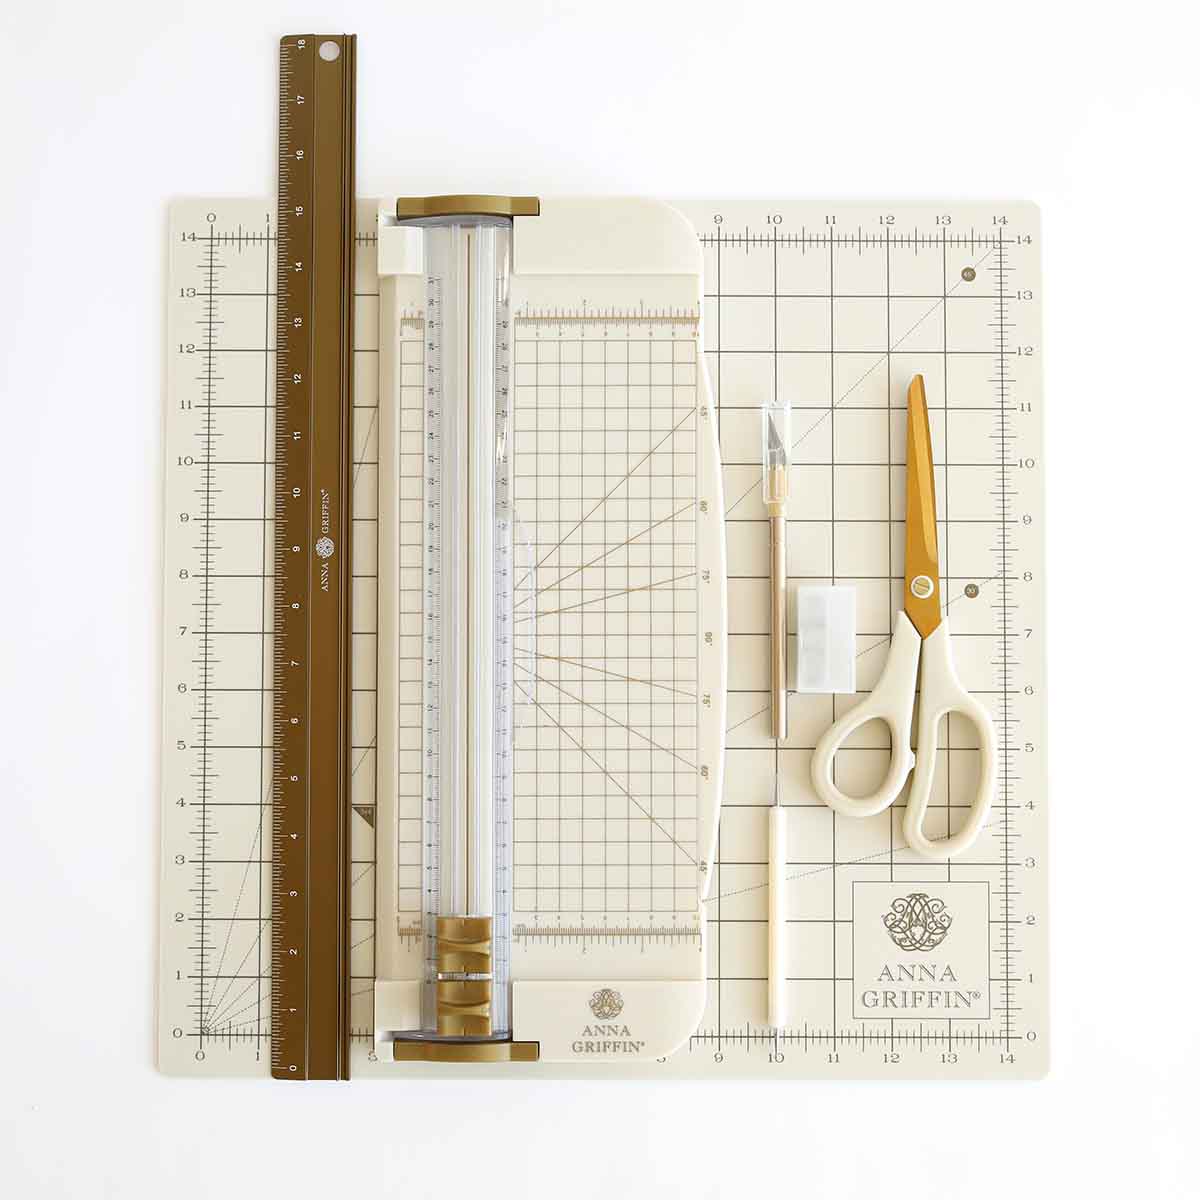 a pair of scissors, a ruler, and a pair of scissors on a cutting.